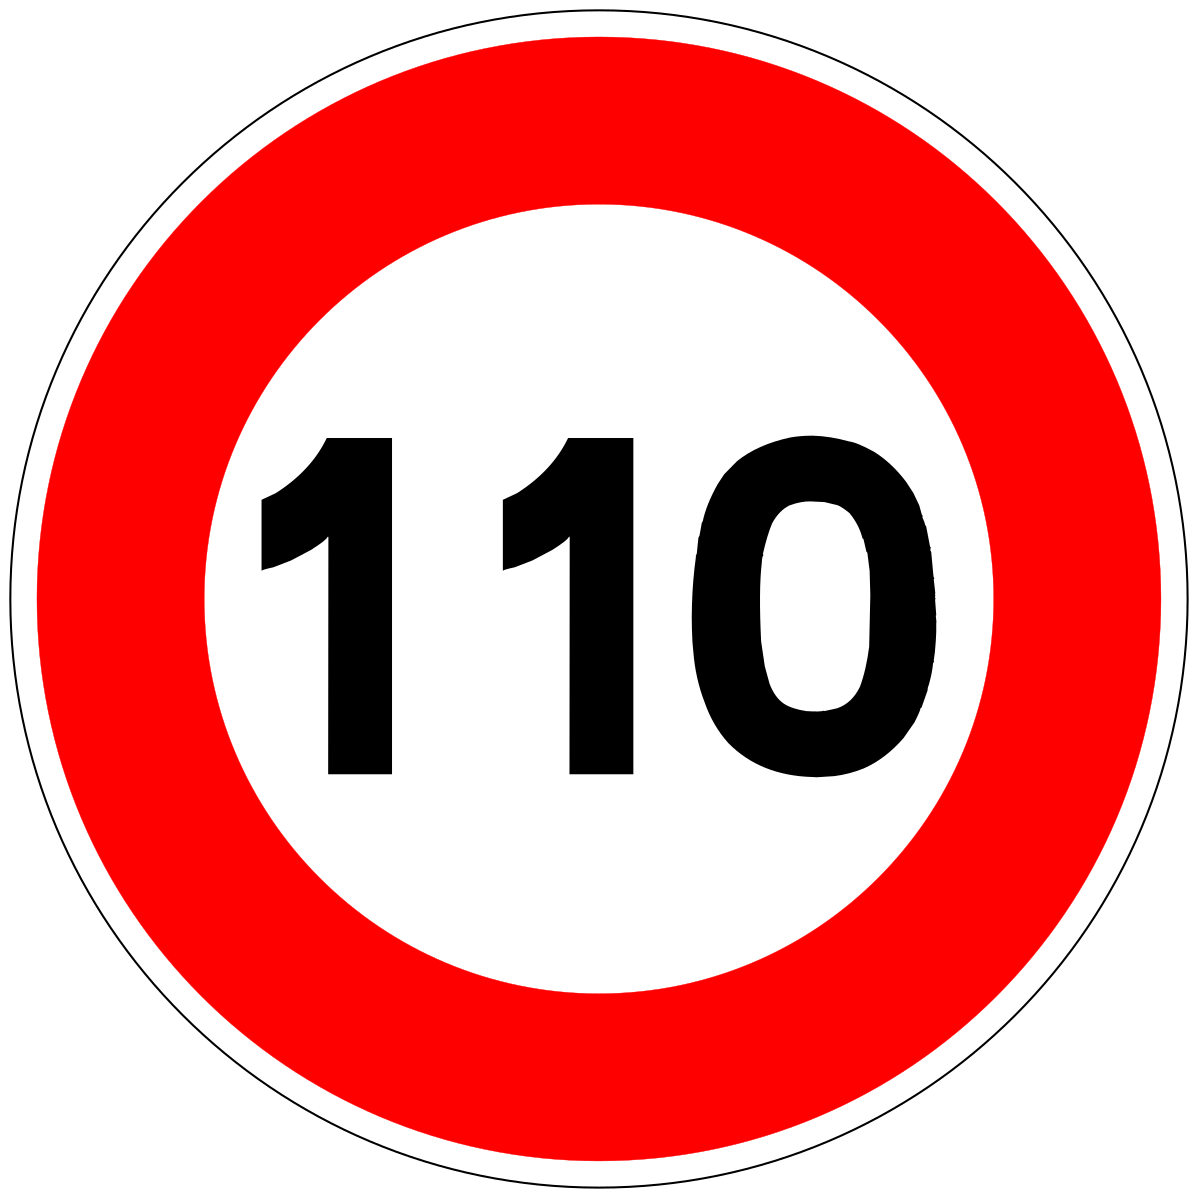 https://upload.wikimedia.org/wikipedia/commons/thumb/f/ff/France_road_sign_B14_%28110%29.svg/1200px-France_road_sign_B14_%28110%29.svg.png